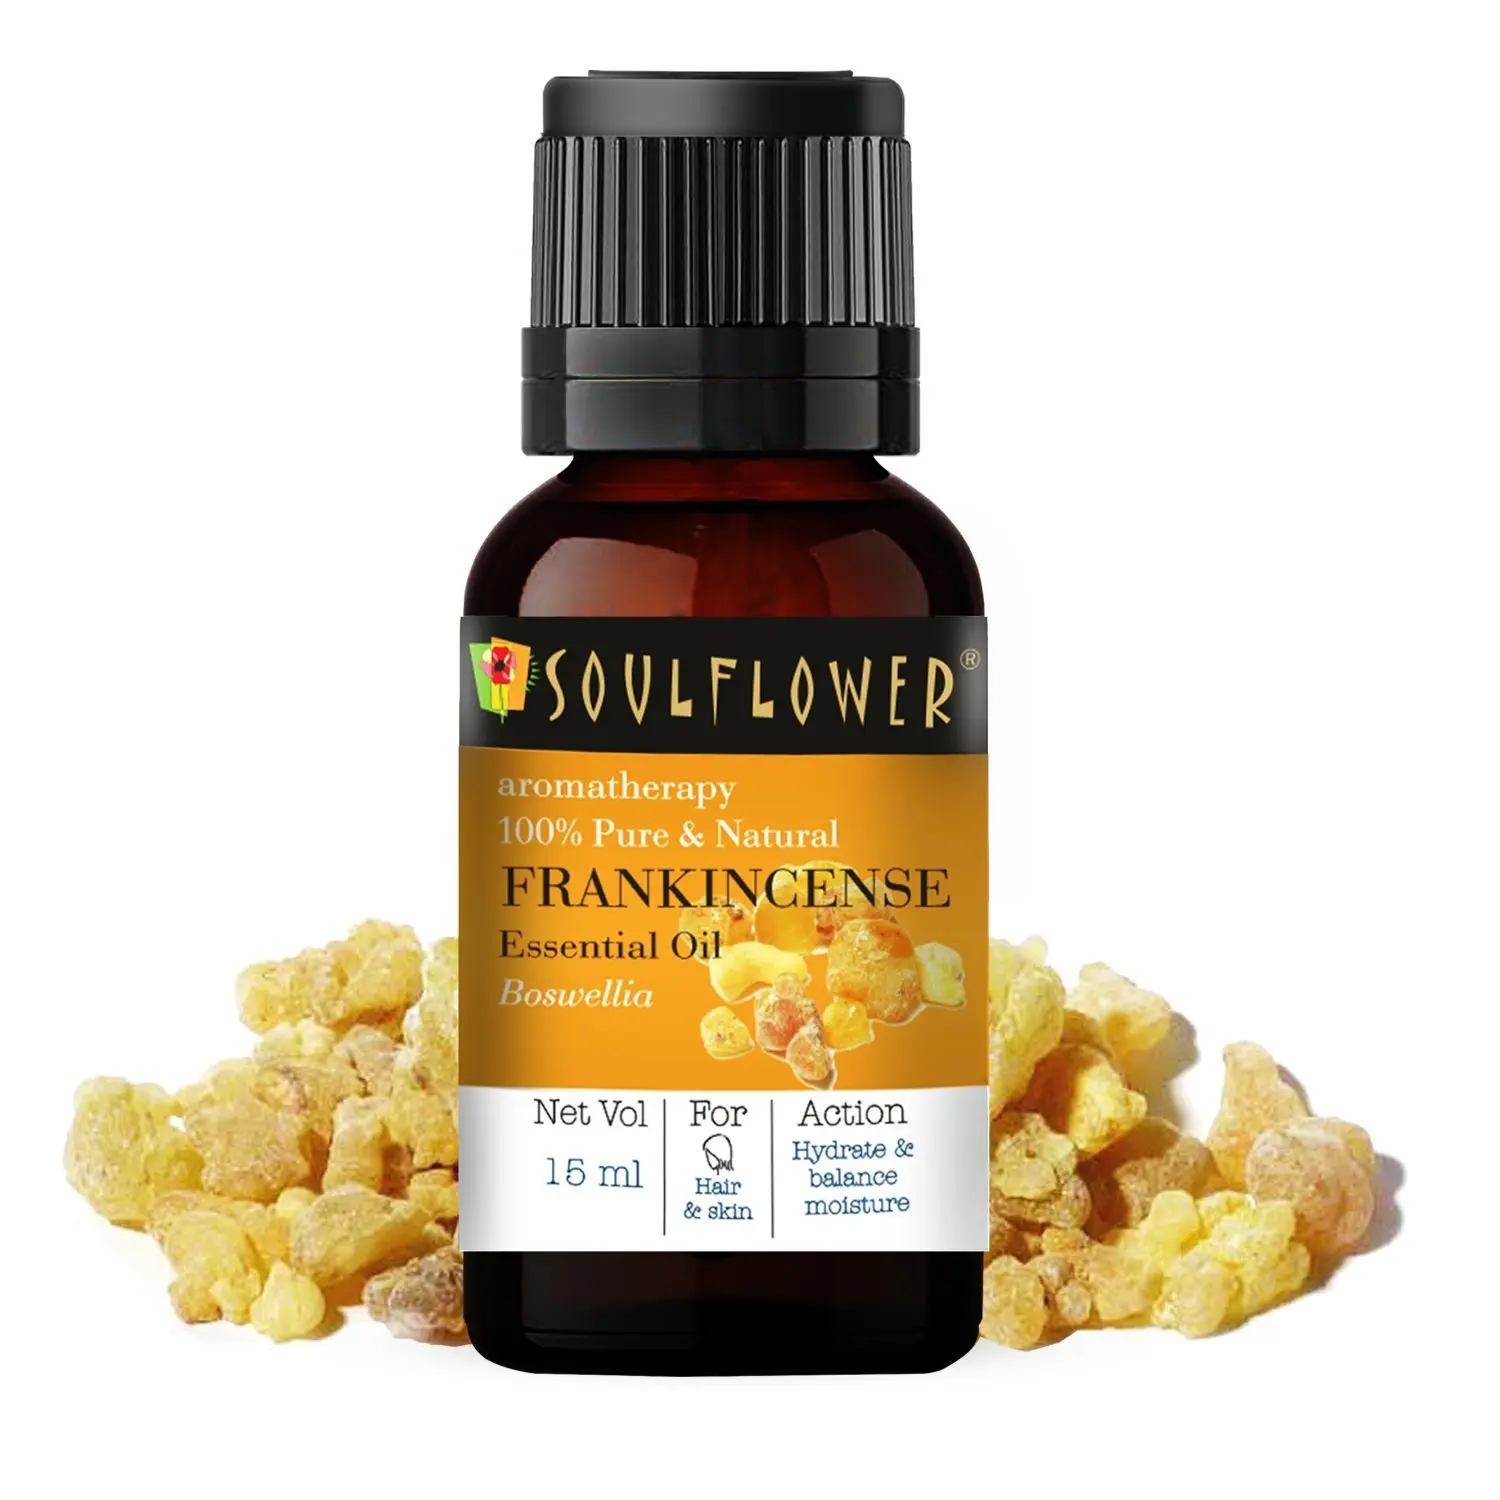 Soulflower Frankincense Essential Oil, For All Hair & Skin Type, 100% Pure & Natural, Therapeutic Grade Aromatherapy, Woody, 15ml